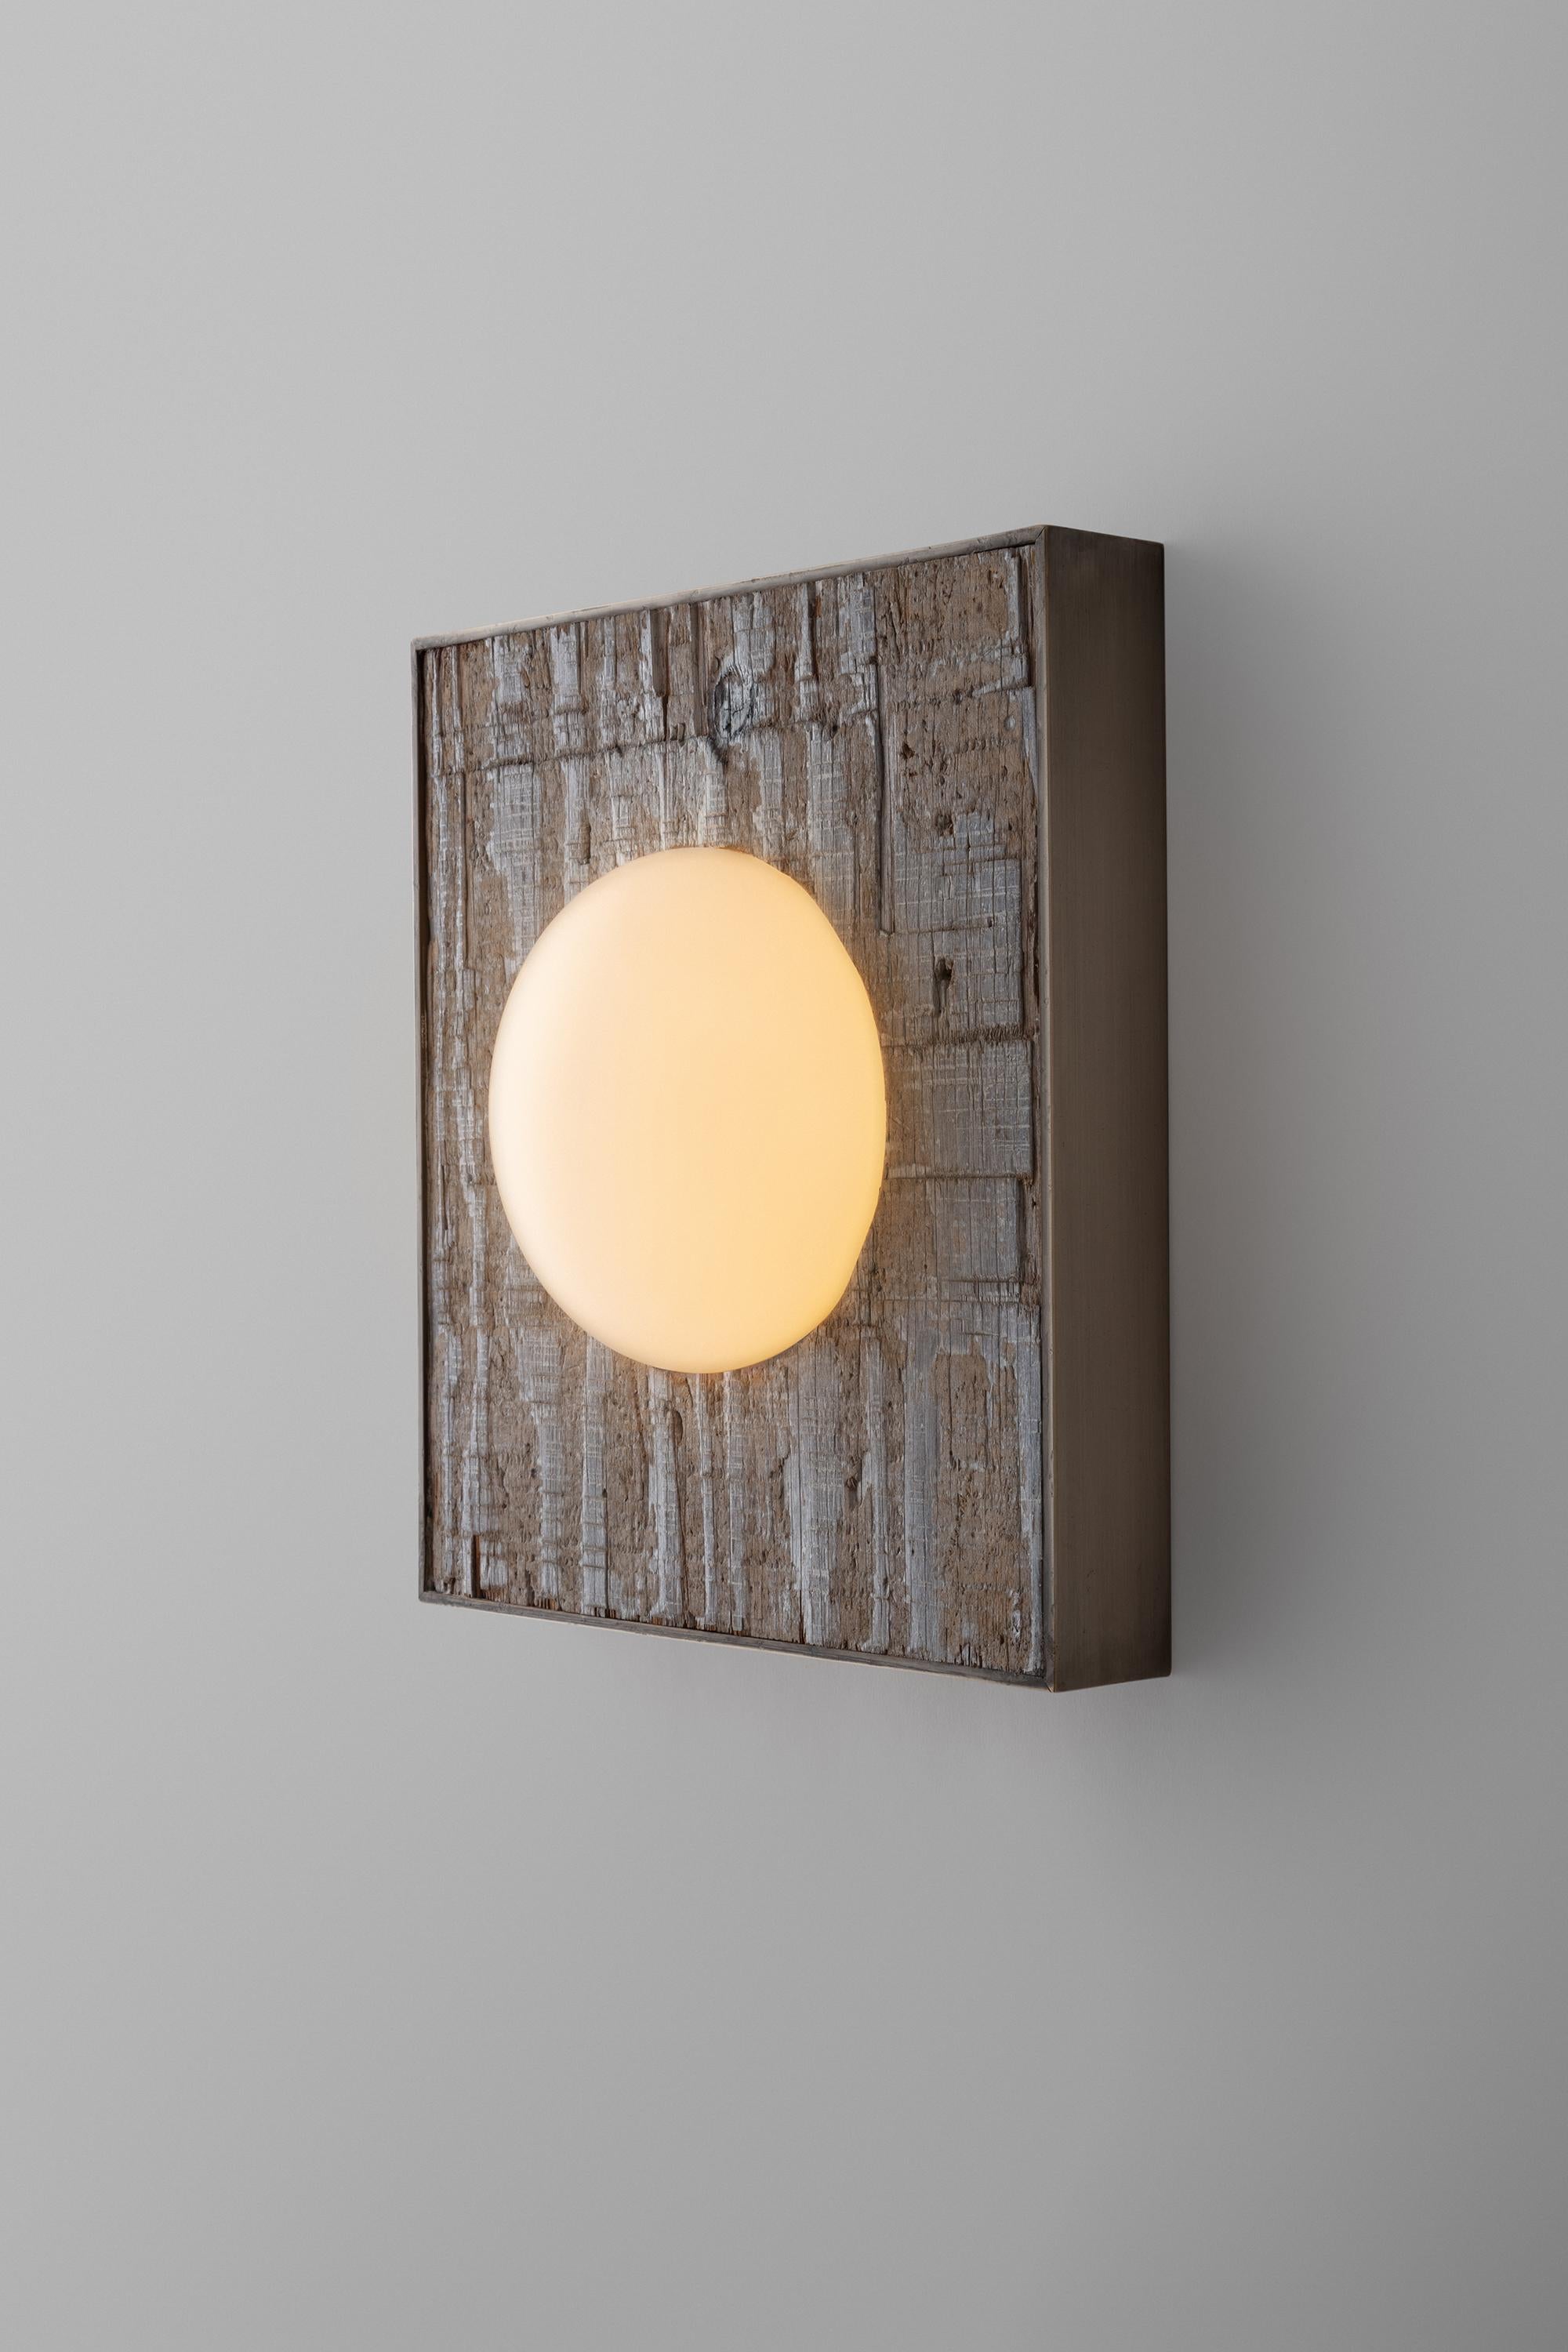 North American Square Sconce, Blown Glass Embedded in Reclaimed Wooden Board, Limited Edition For Sale